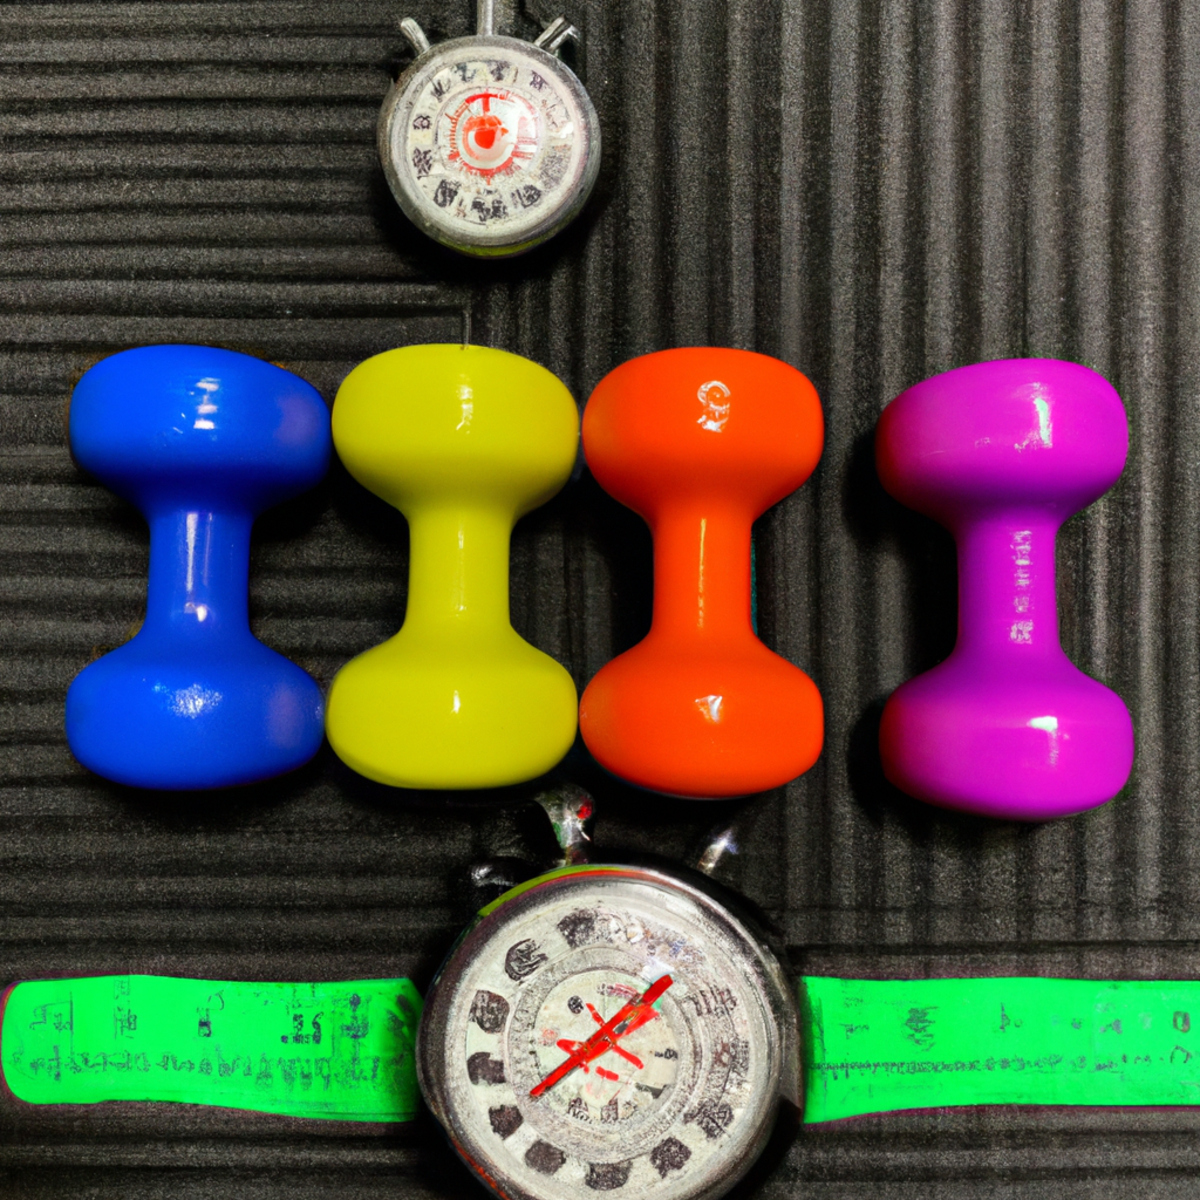 The photo captures a set of colorful dumbbells arranged neatly on a black mat, with a stopwatch placed in the center. The weights range from light to heavy, indicating the varying levels of intensity in the HIIT workouts. The stopwatch, with its digital display, adds a sense of urgency and precision to the image, emphasizing the importance of timing in these workouts. The lighting is bright and crisp, highlighting the texture and details of the equipment. Overall, the photo conveys a sense of energy and determination, inviting readers to take on the challenge of mastering their endurance through HIIT workouts.